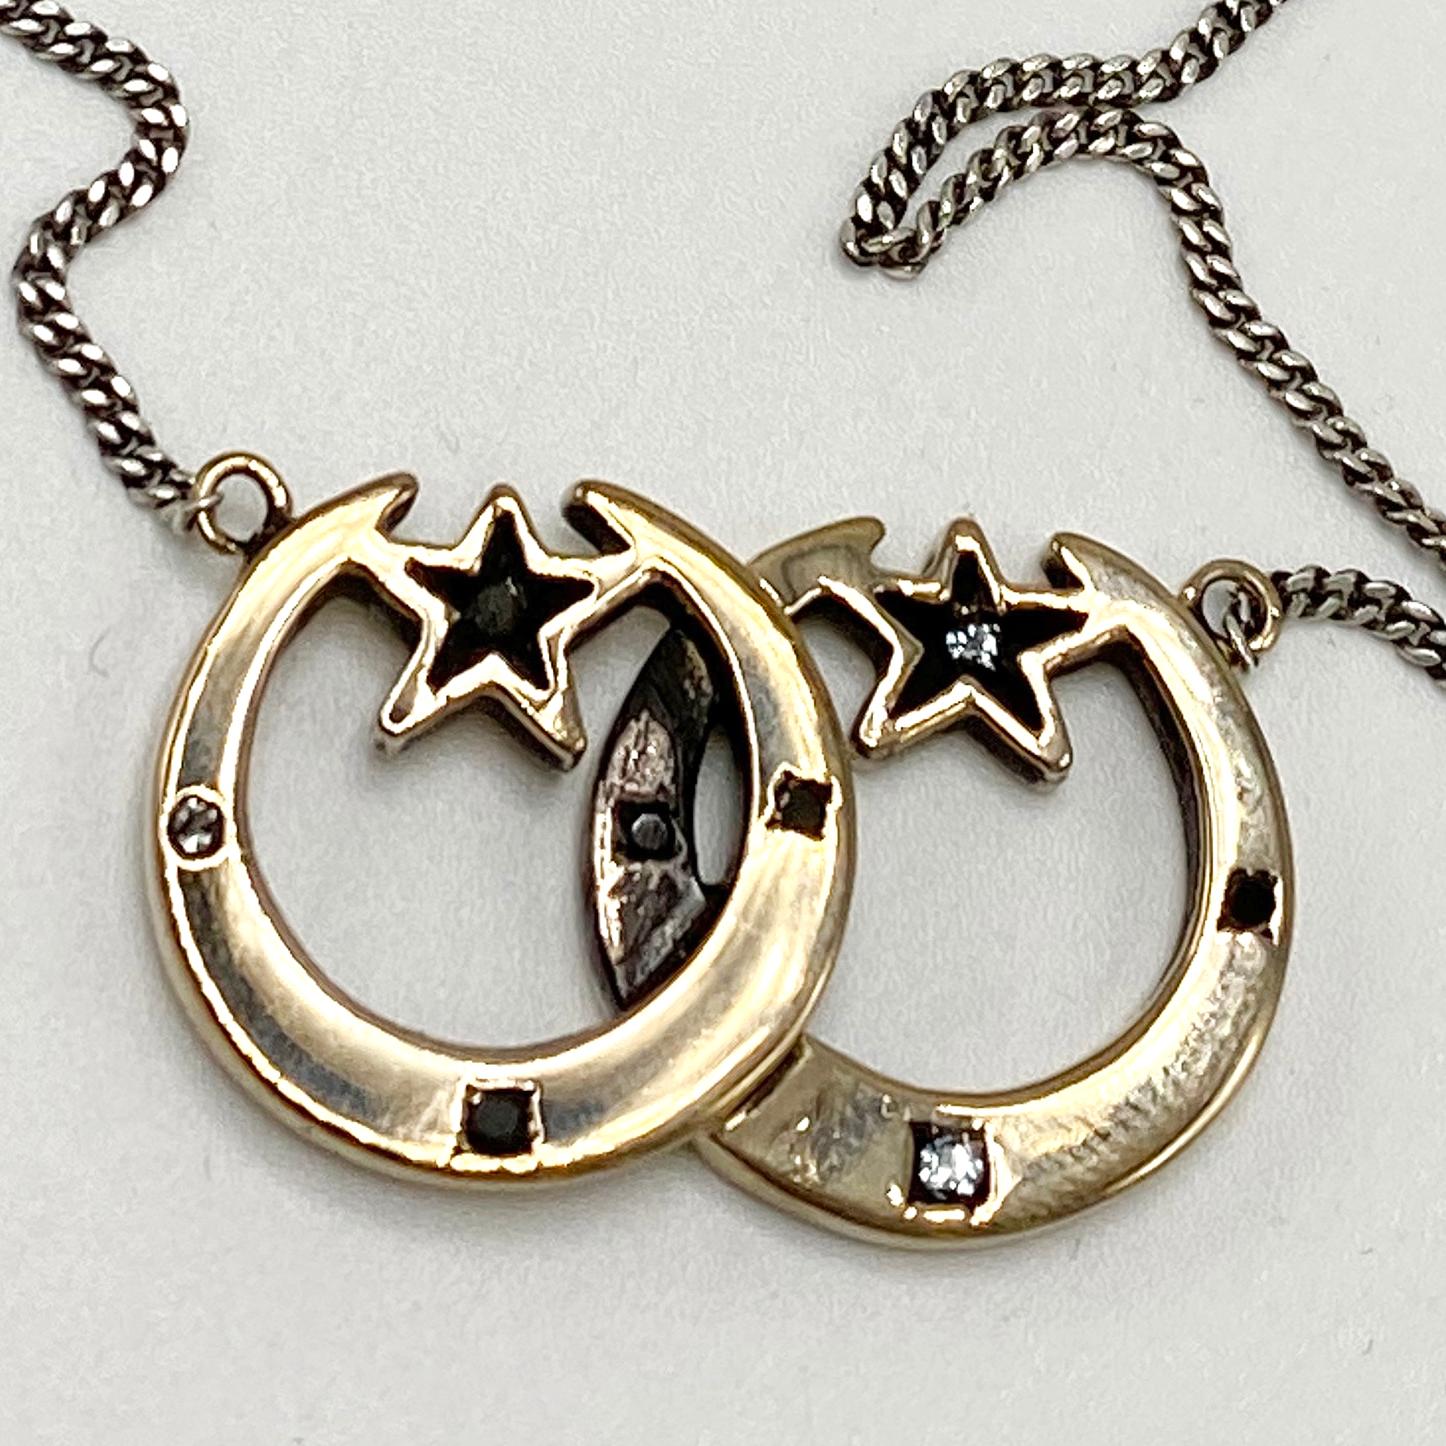 Contemporary White and Black Diamond Crescent Moon Star Necklace Silver Chain J Dauphin For Sale